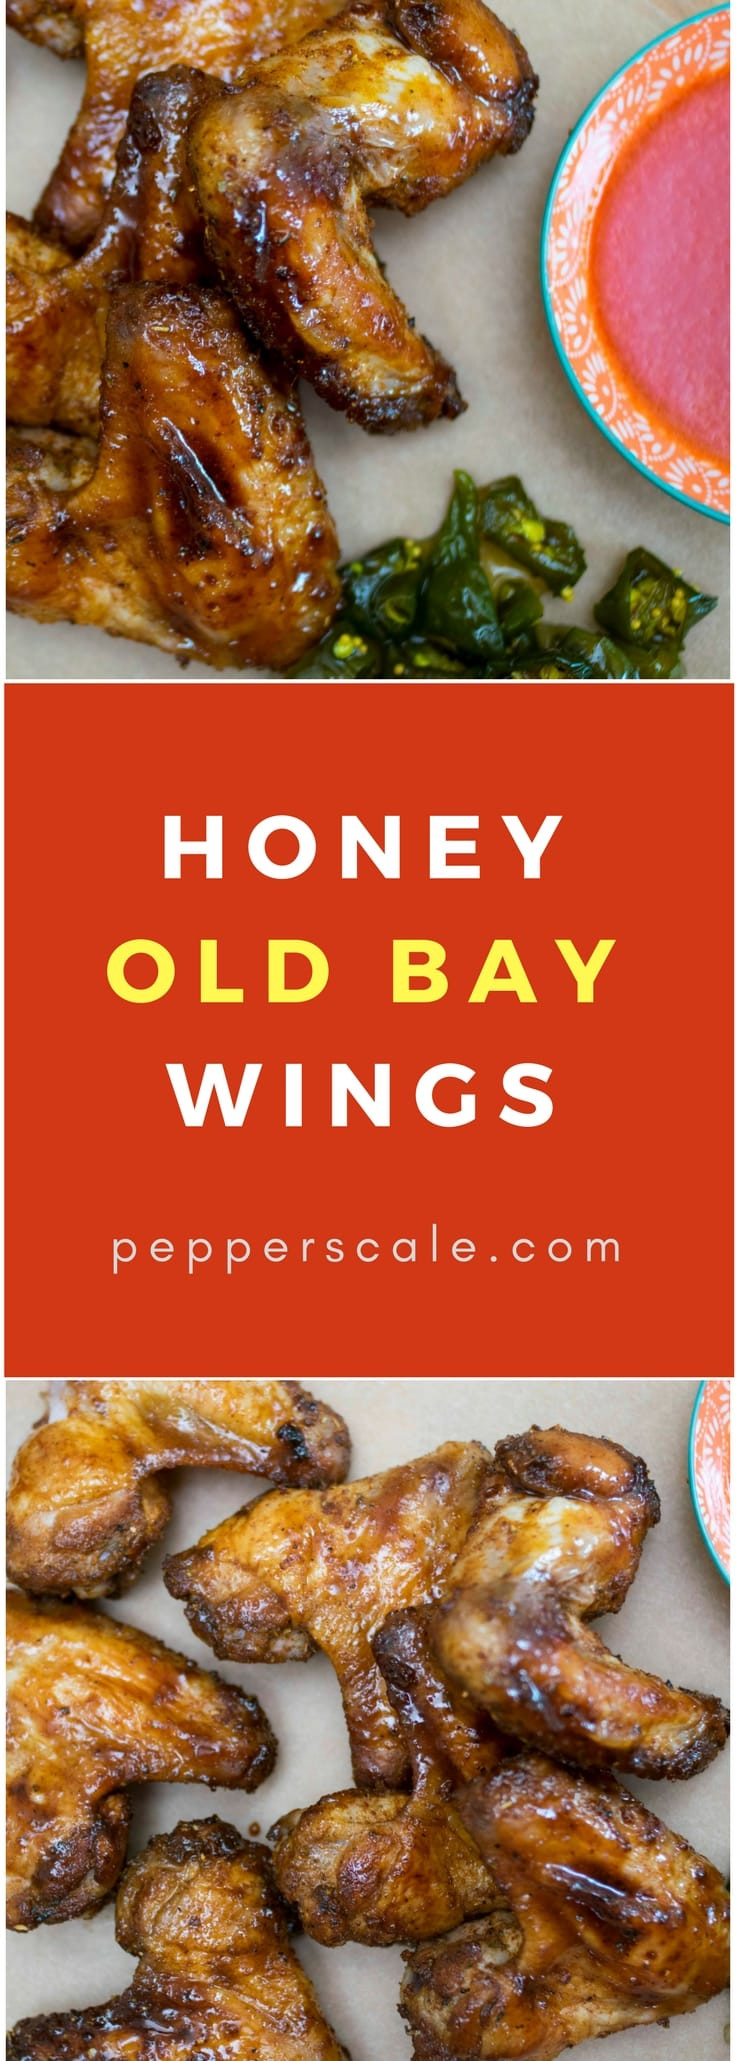 Old Bay Chicken Wings Honey Old Bay Wings PepperScale